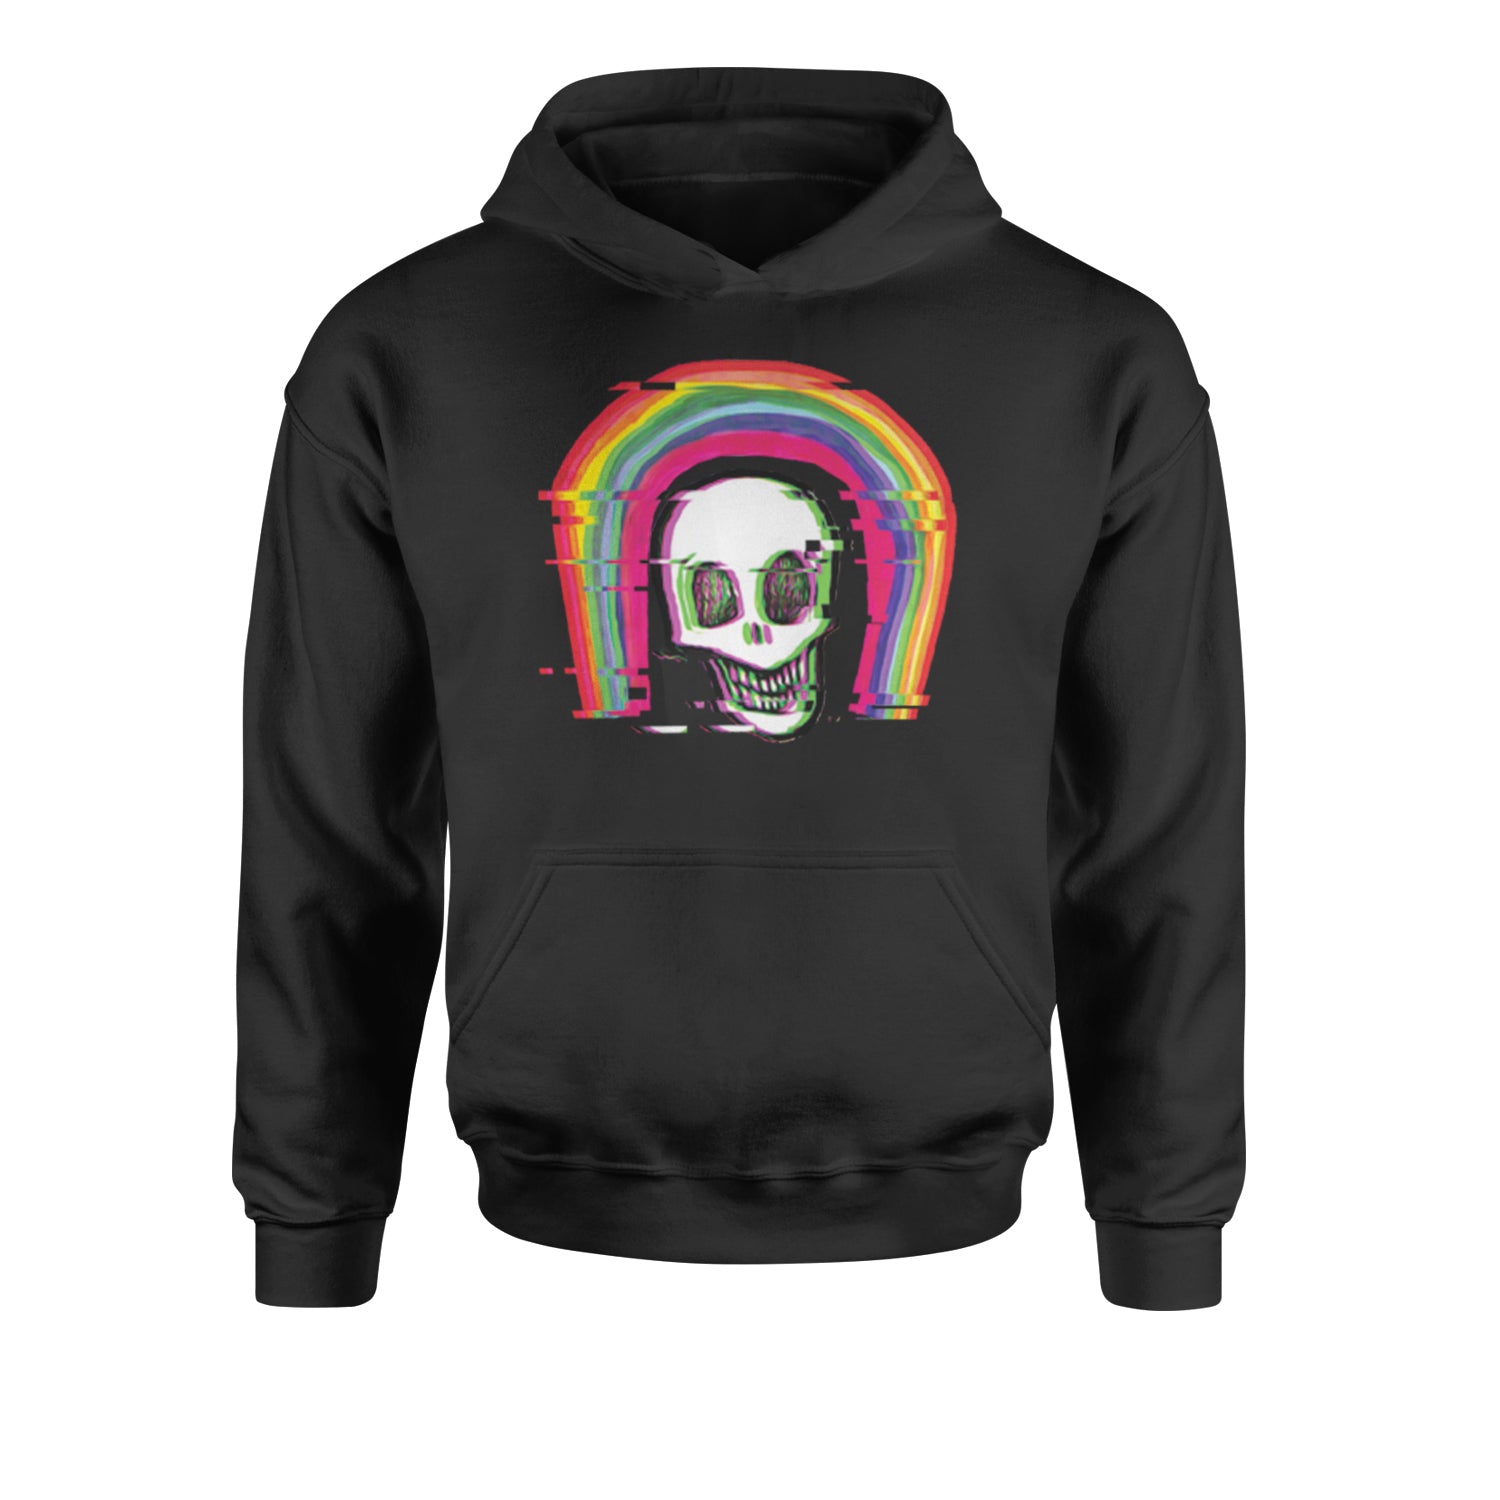 Rainbow Distorted Skull Youth-Sized Hoodie